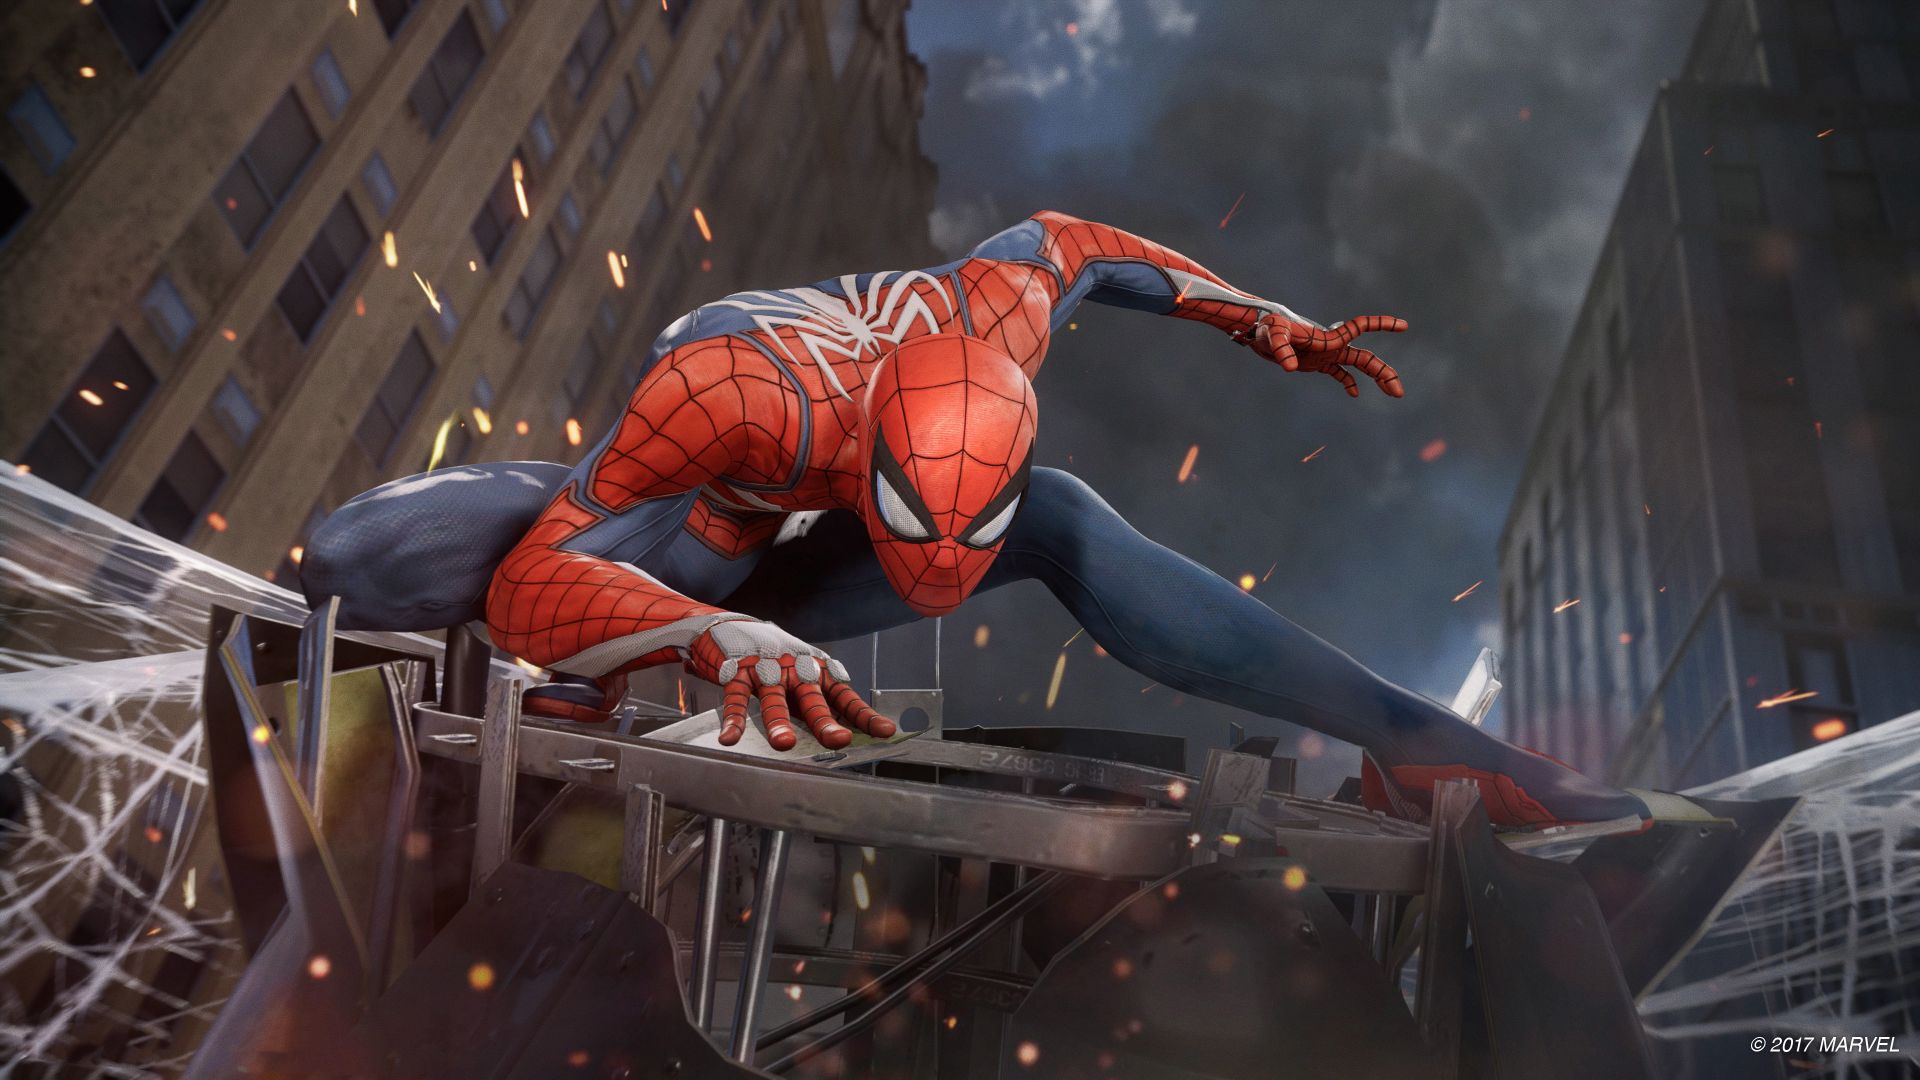 Spiderman PS4 Game Wallpaper New Tab You Need to Know